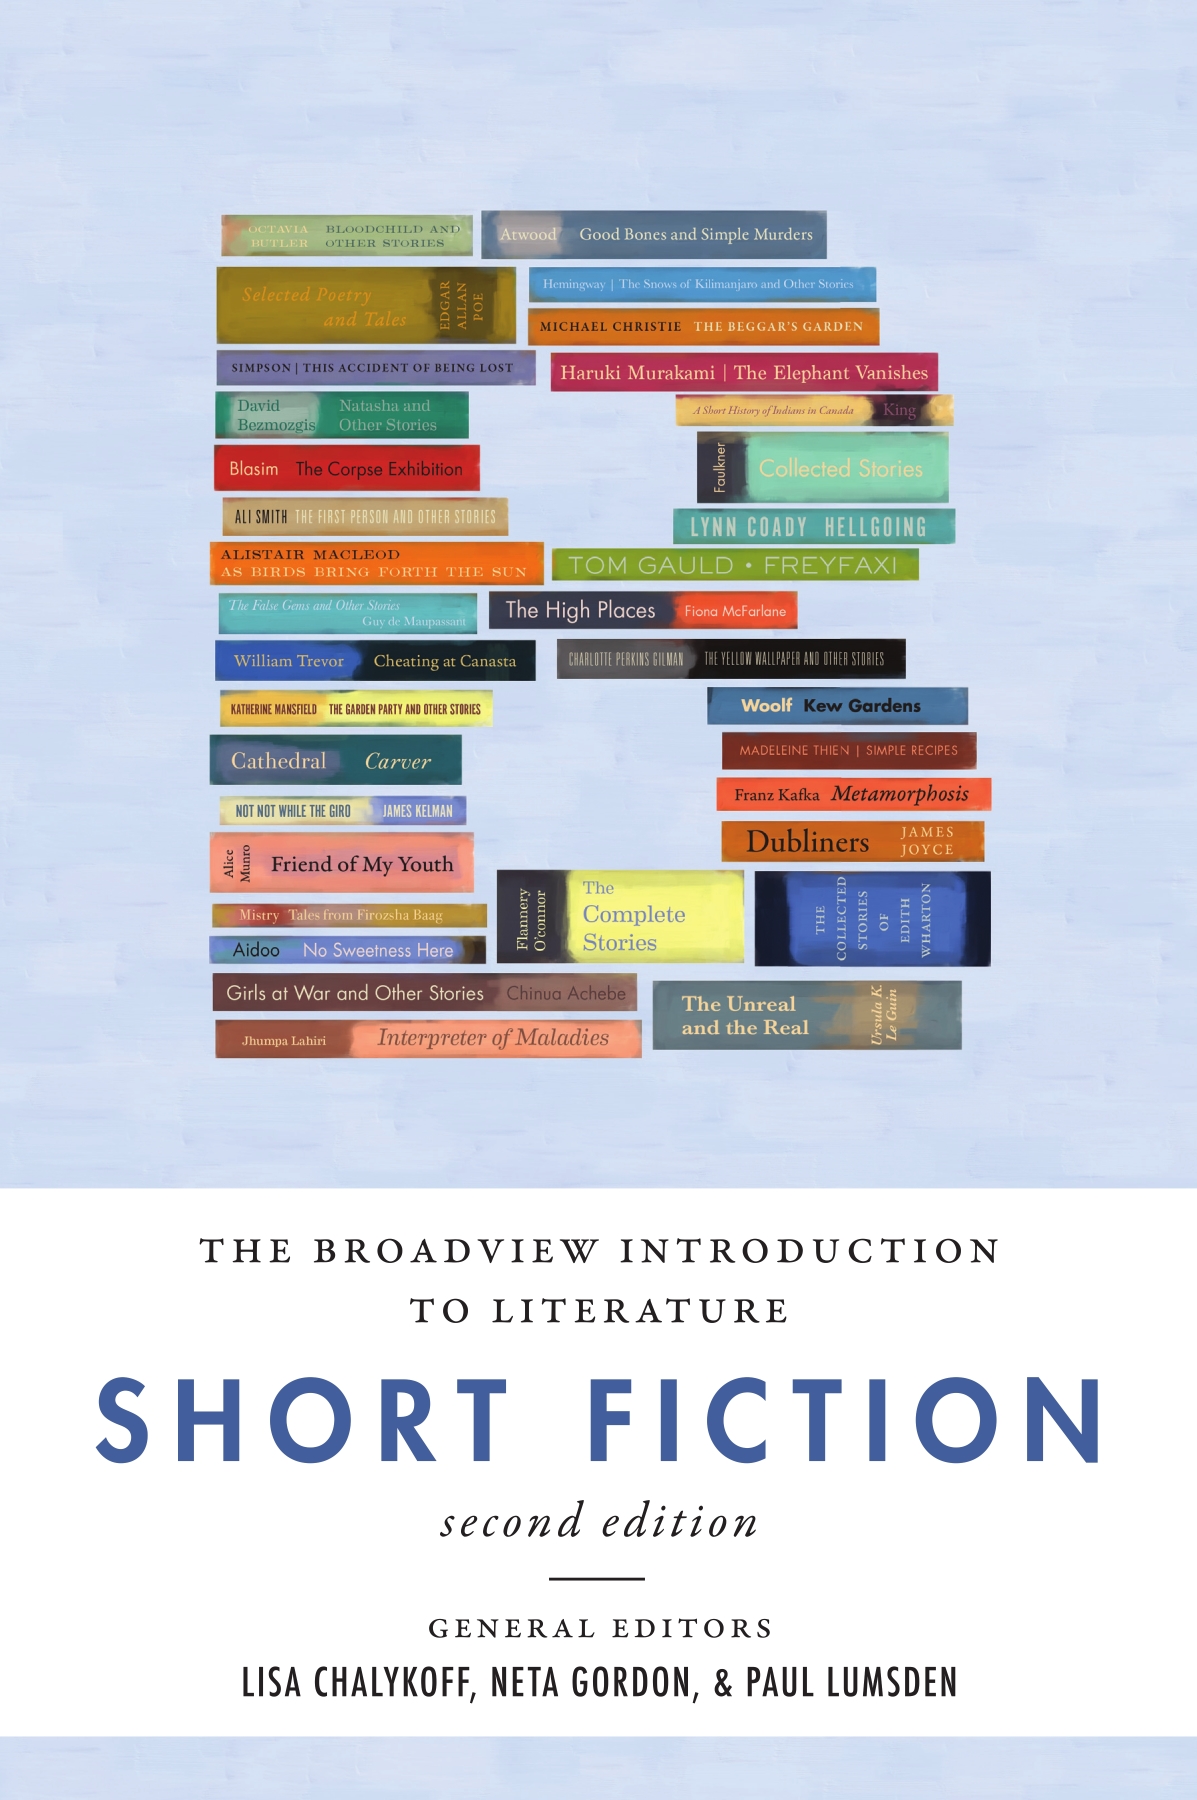 Press　Edition　Fiction　Introduction　Short　The　Second　Literature:　Broadview　to　Broadview